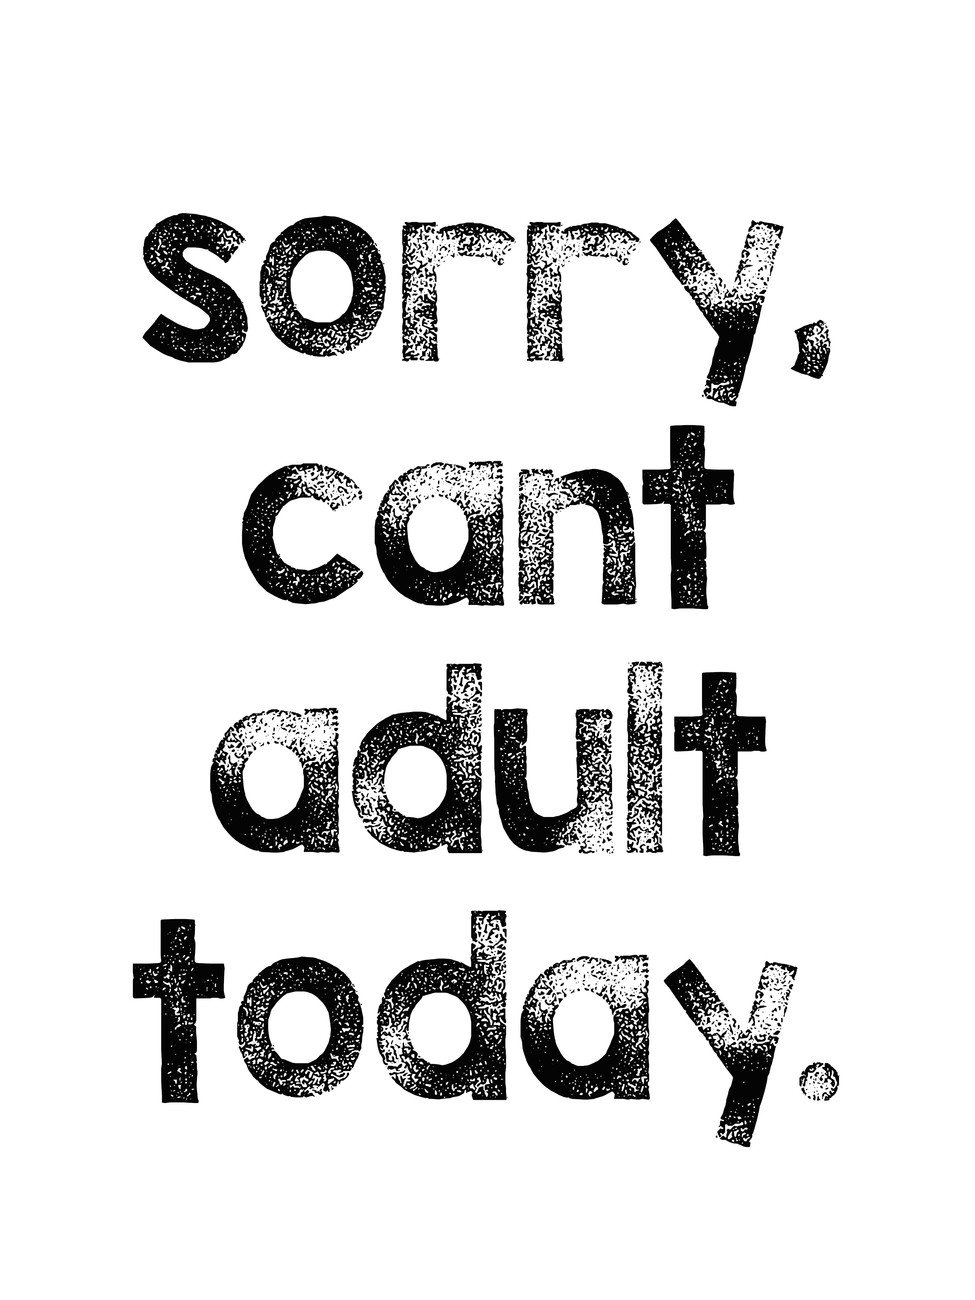 Illustration Sorry cant adult today